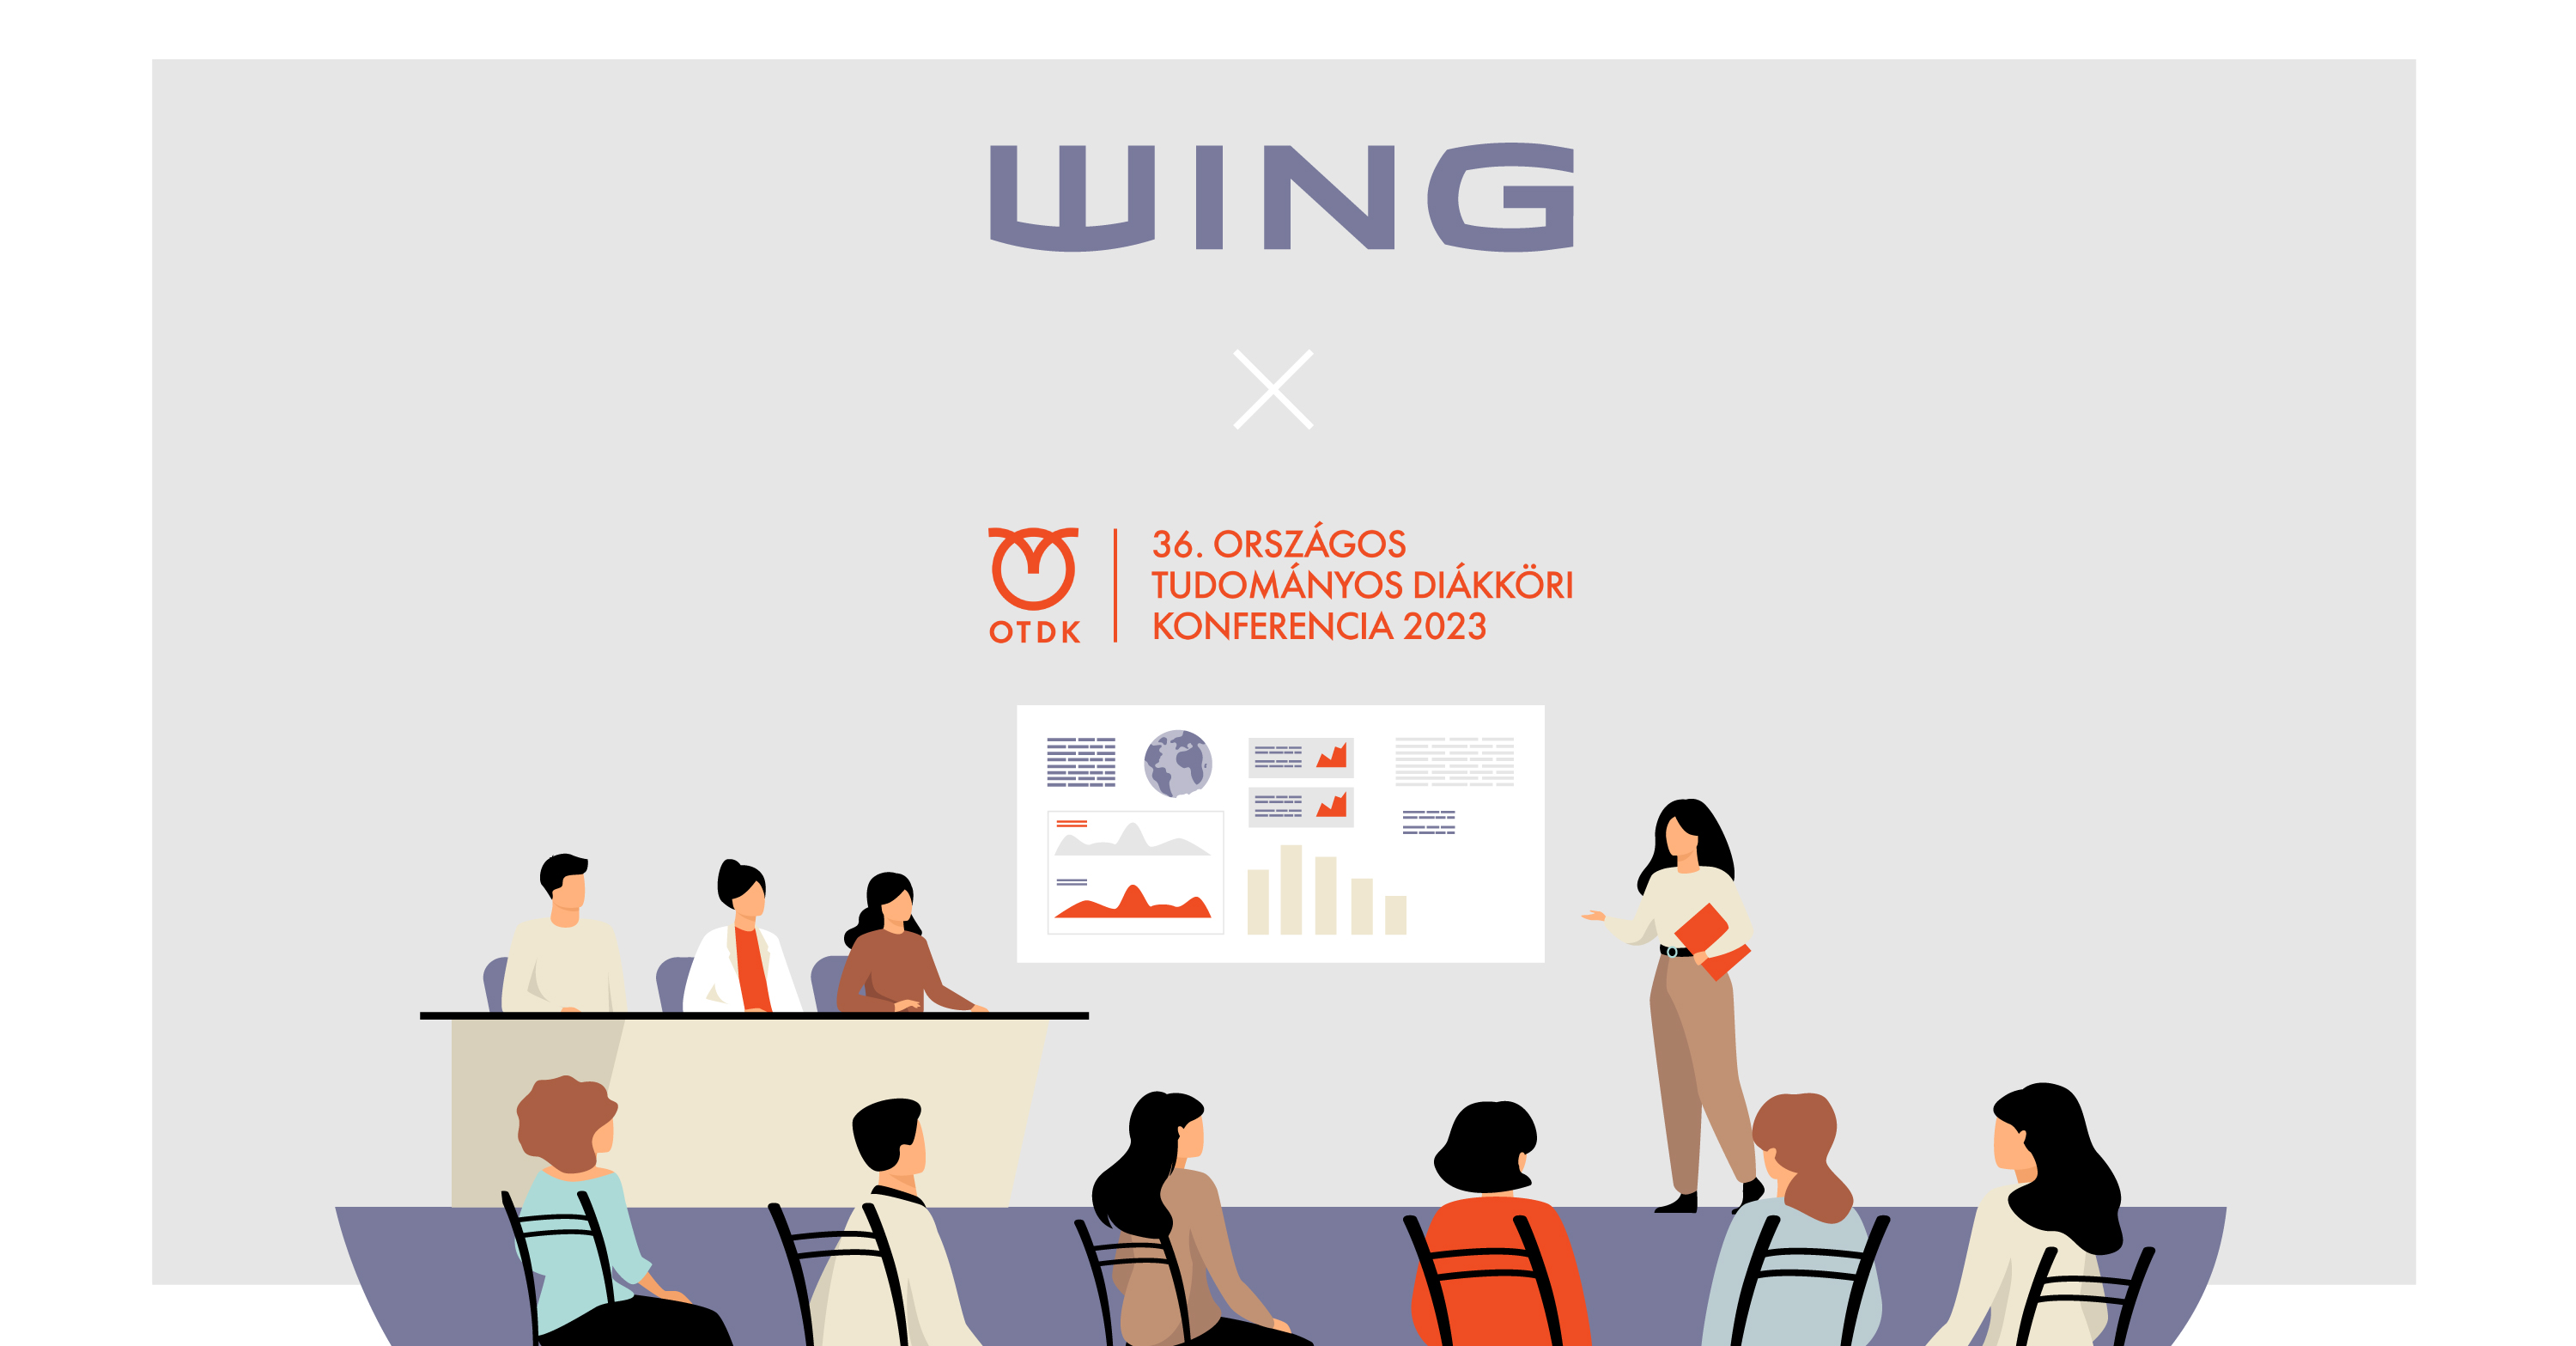 WING is sponsoring the National Scientific Students' Associations Conference for the 4th time